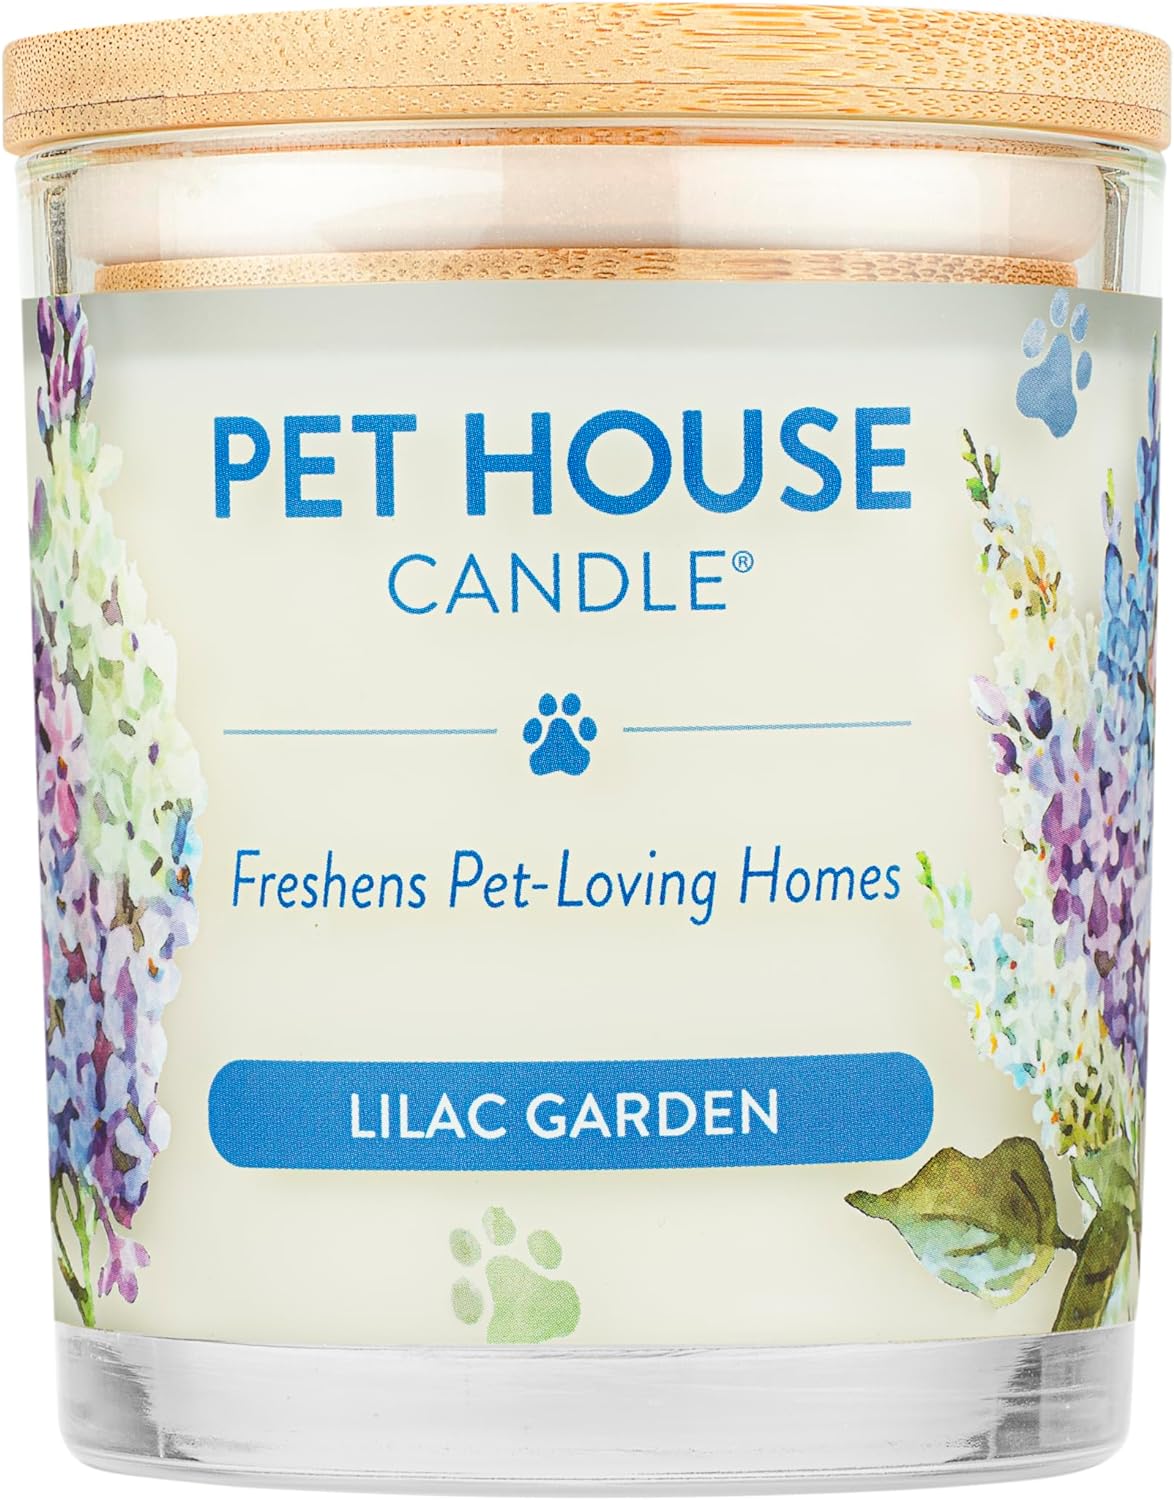 Pet House Lilac Garden Natural Plant-Based Wax Candle